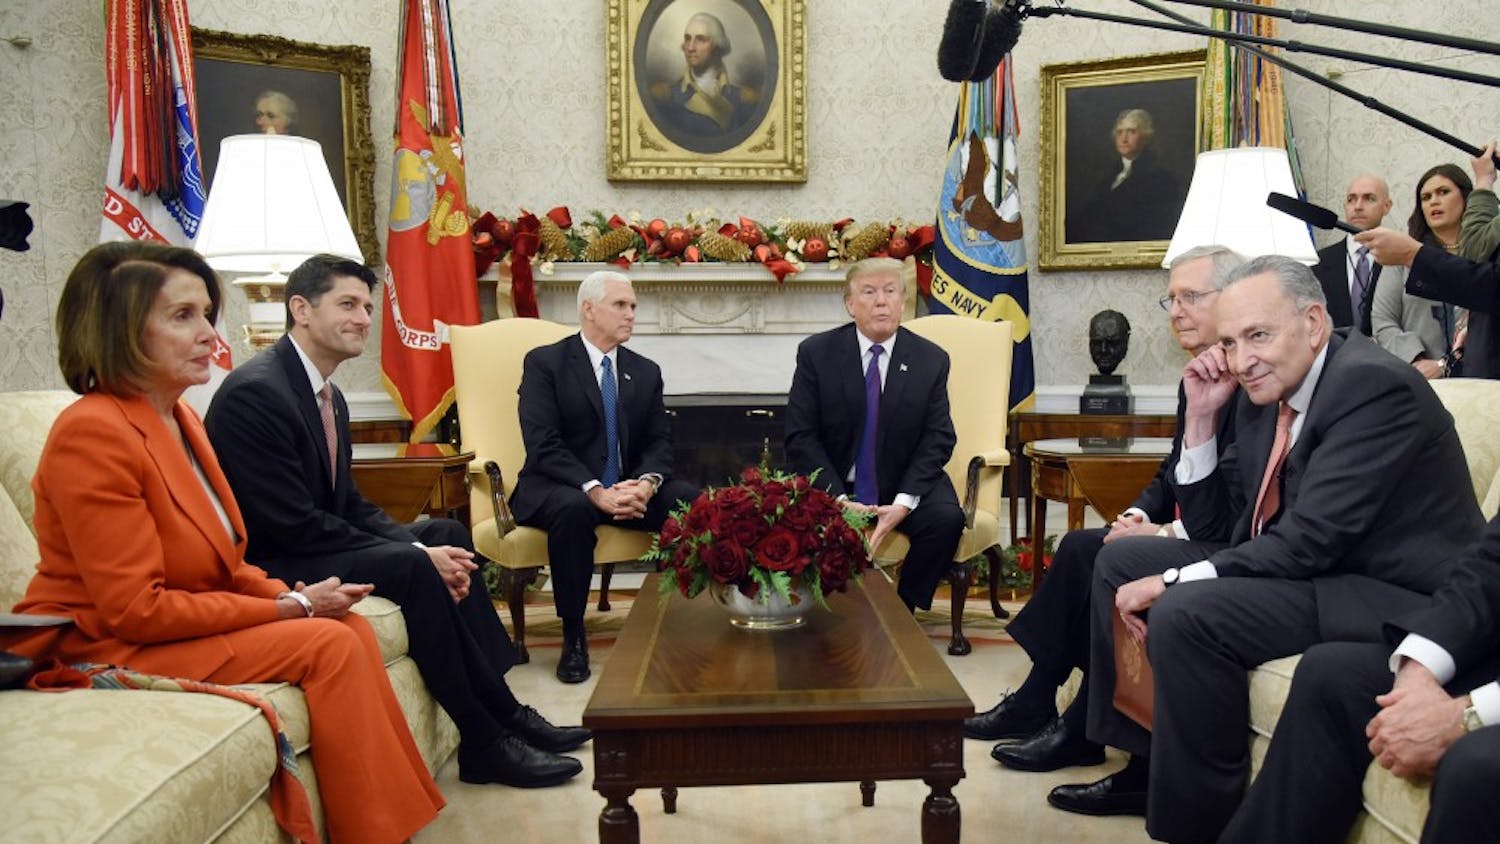 U.S. President Donald Trump and Vice President Mike Pence look on during a meeting with Congressional leadership including House Minority Leader Rep. Nancy Pelosi (D-Calif.), House Speaker Paul Ryan (R-Wis.), Senate Majority Leader Mitch McConnell, and Sen. Charles Schumer (D-NY) in the Oval Office of the White House Thursday, Dec. 7, 2017 in Washington, D.C.  (Olivier Douliery/Abaca Press/TNS) 